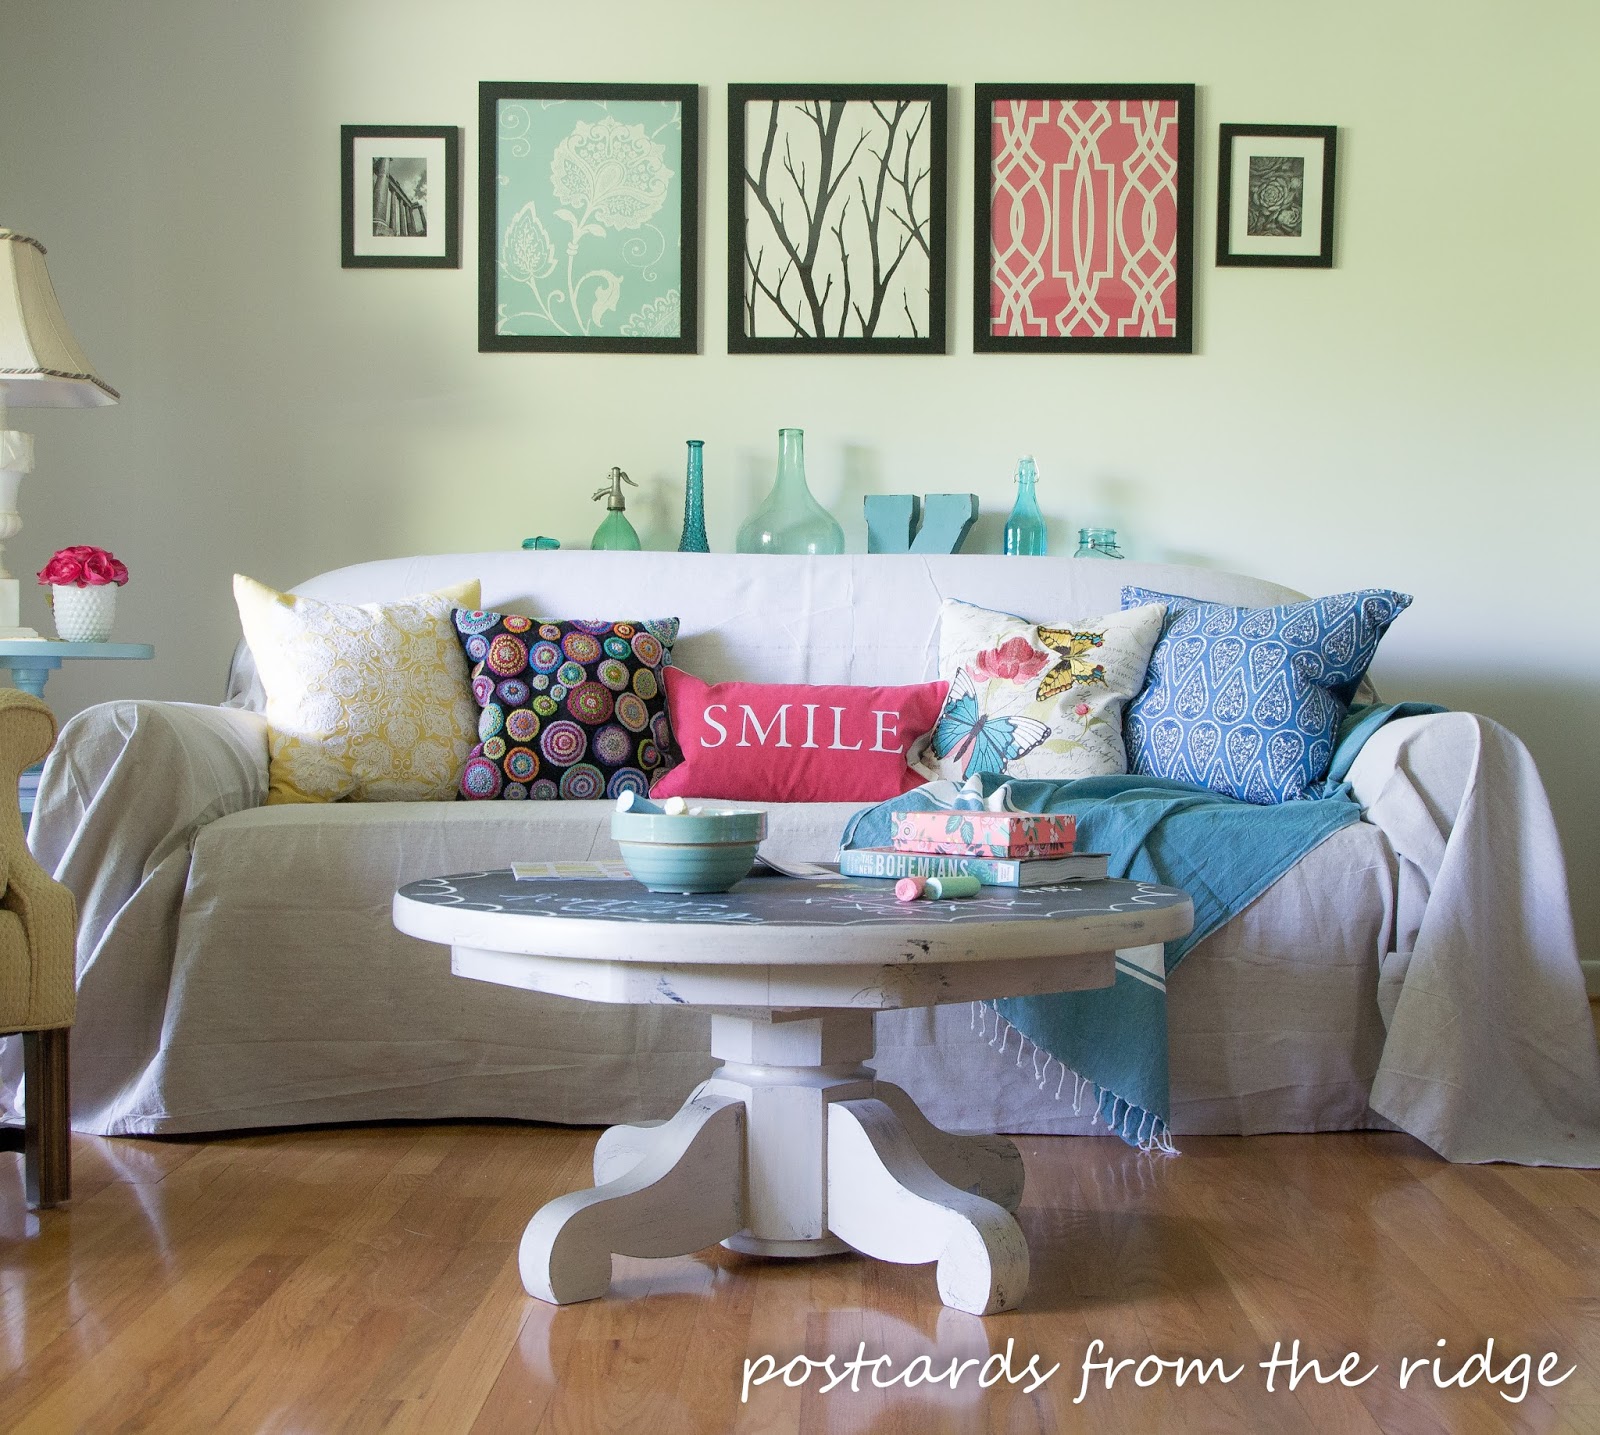 Pedestal Table with chalkboard top inspired by Pottery Barn